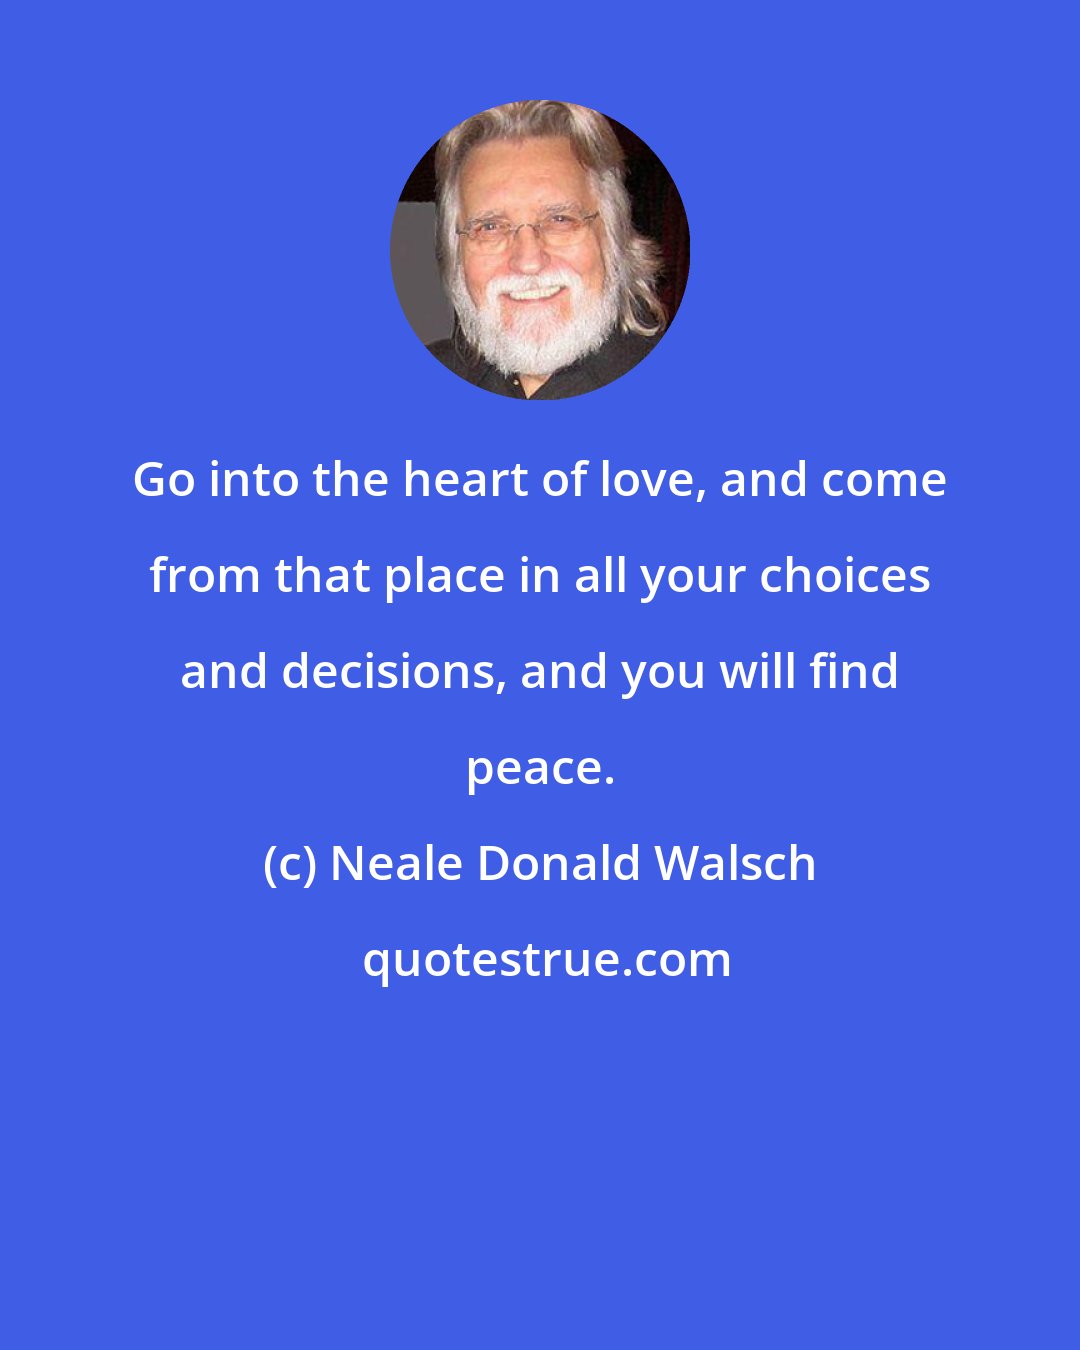 Neale Donald Walsch: Go into the heart of love, and come from that place in all your choices and decisions, and you will find peace.